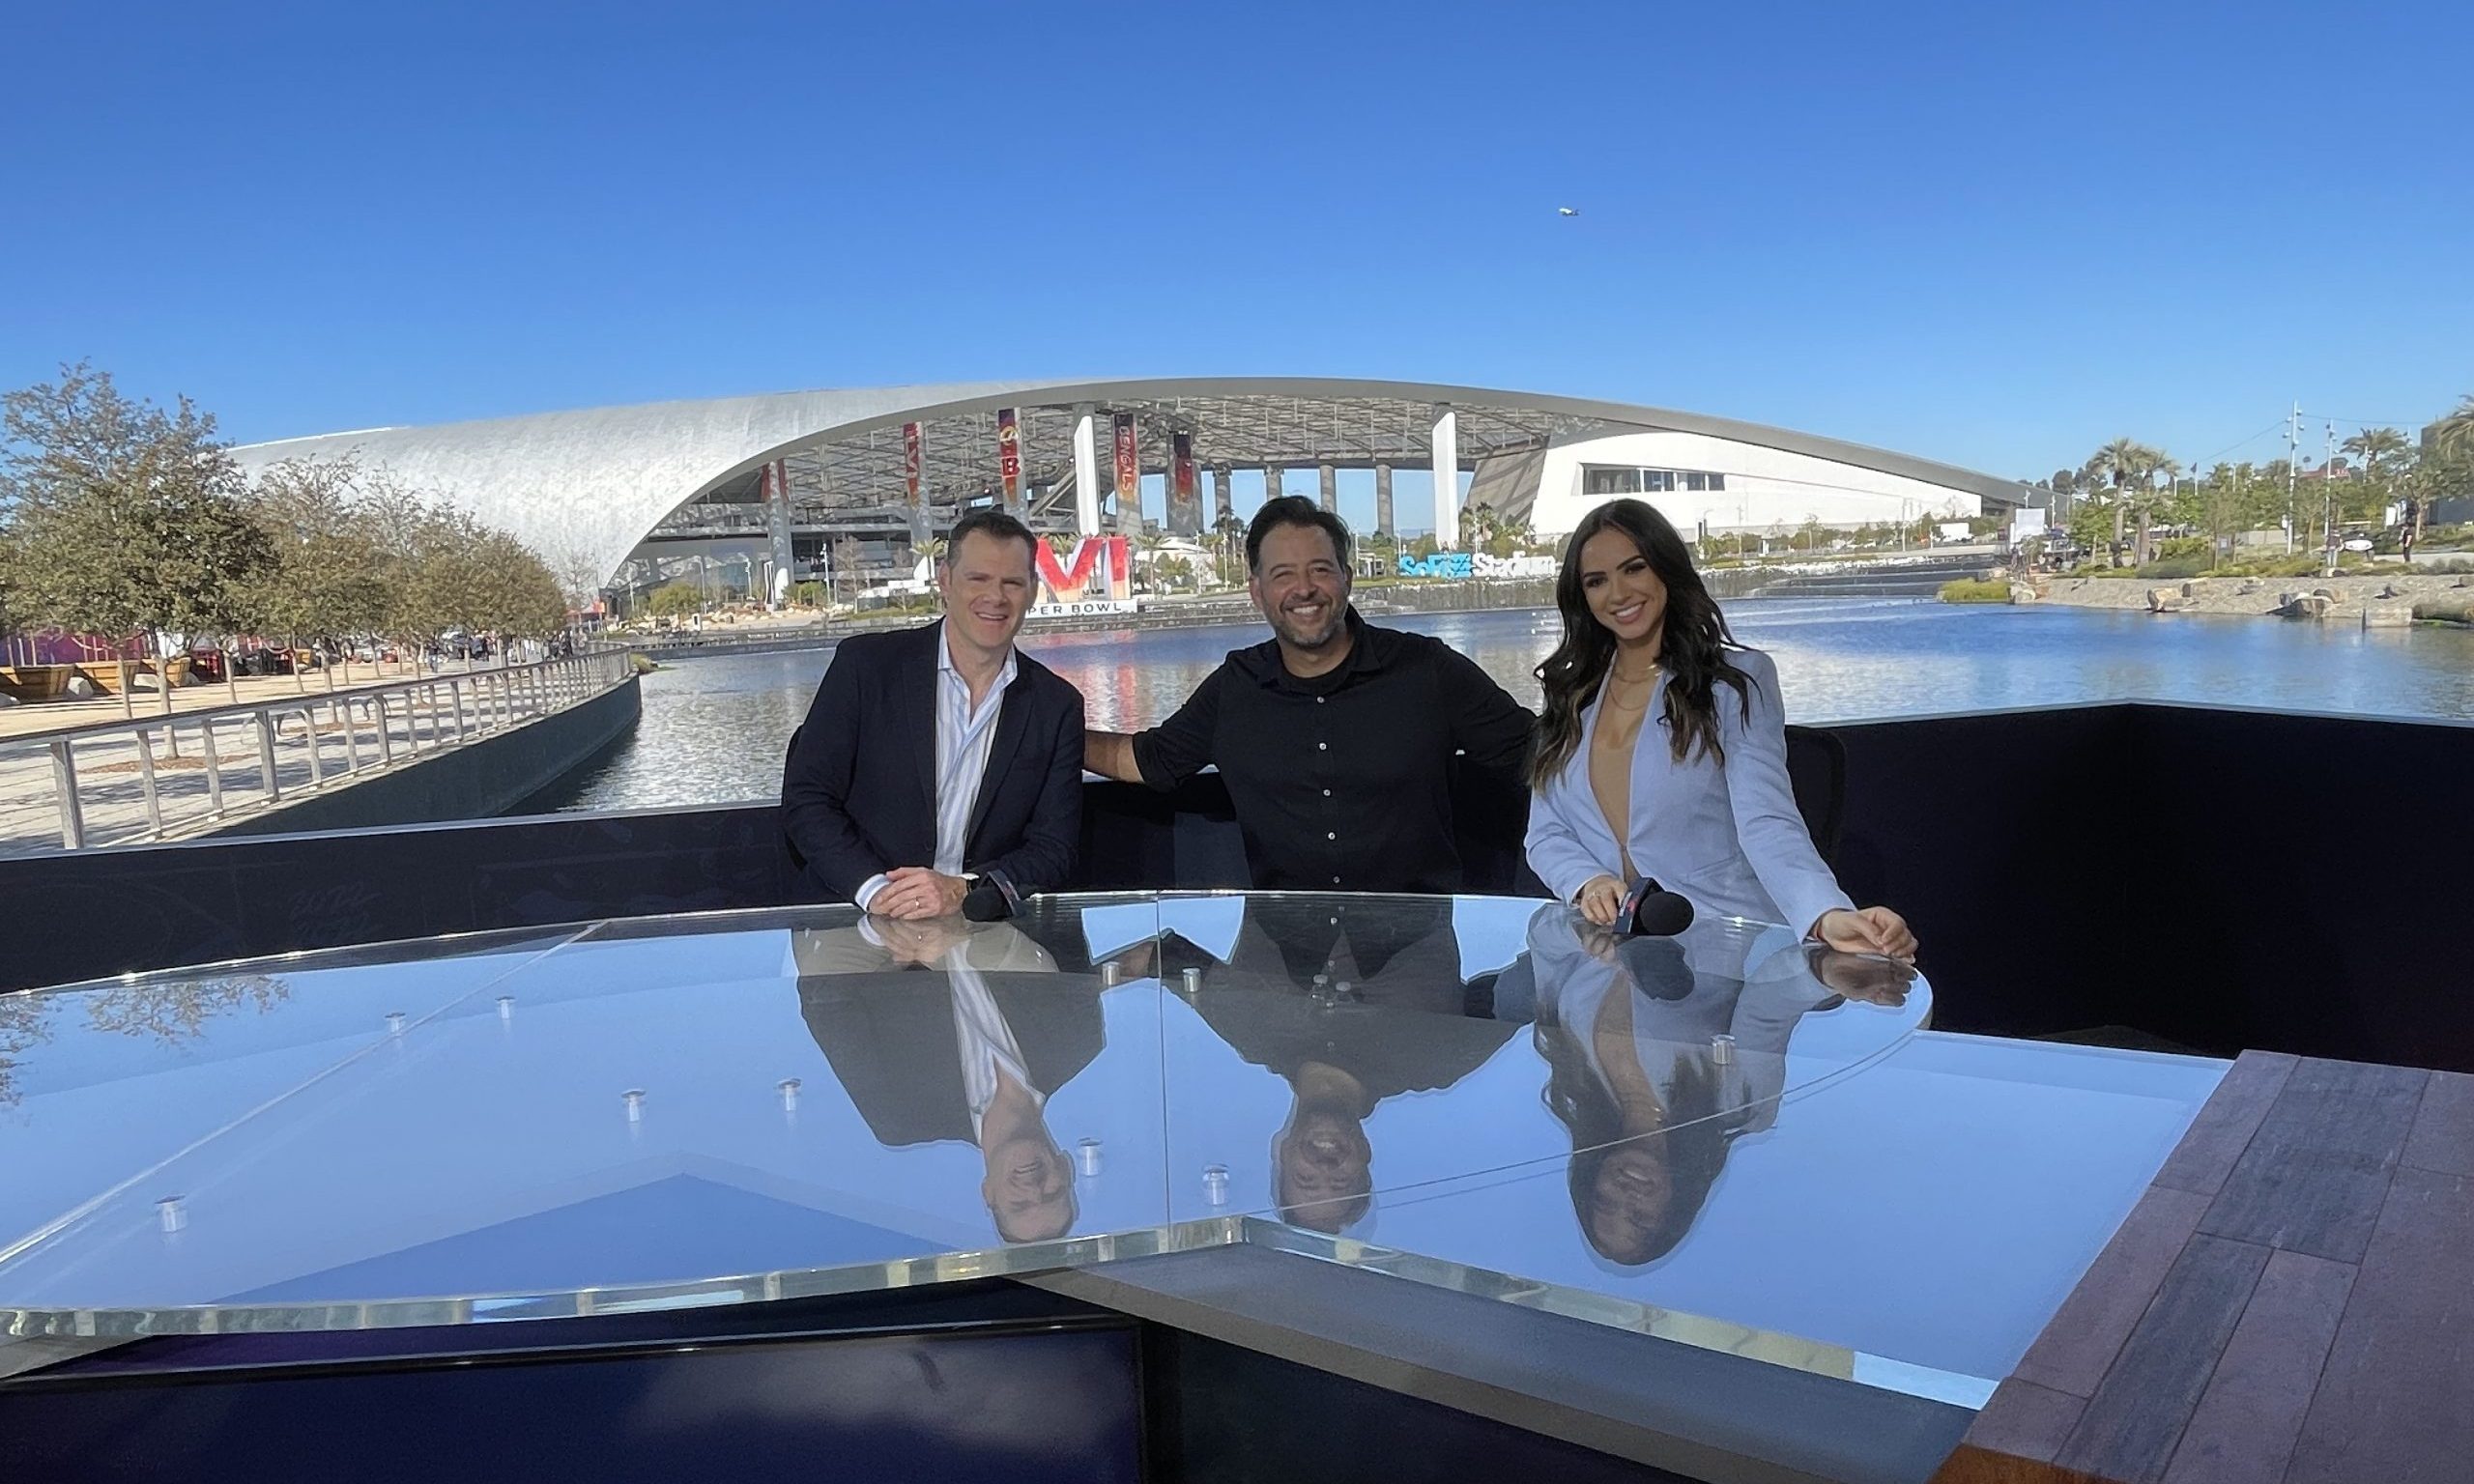 Super Bowl Preview: The New Fox on Display and Latinx Representation